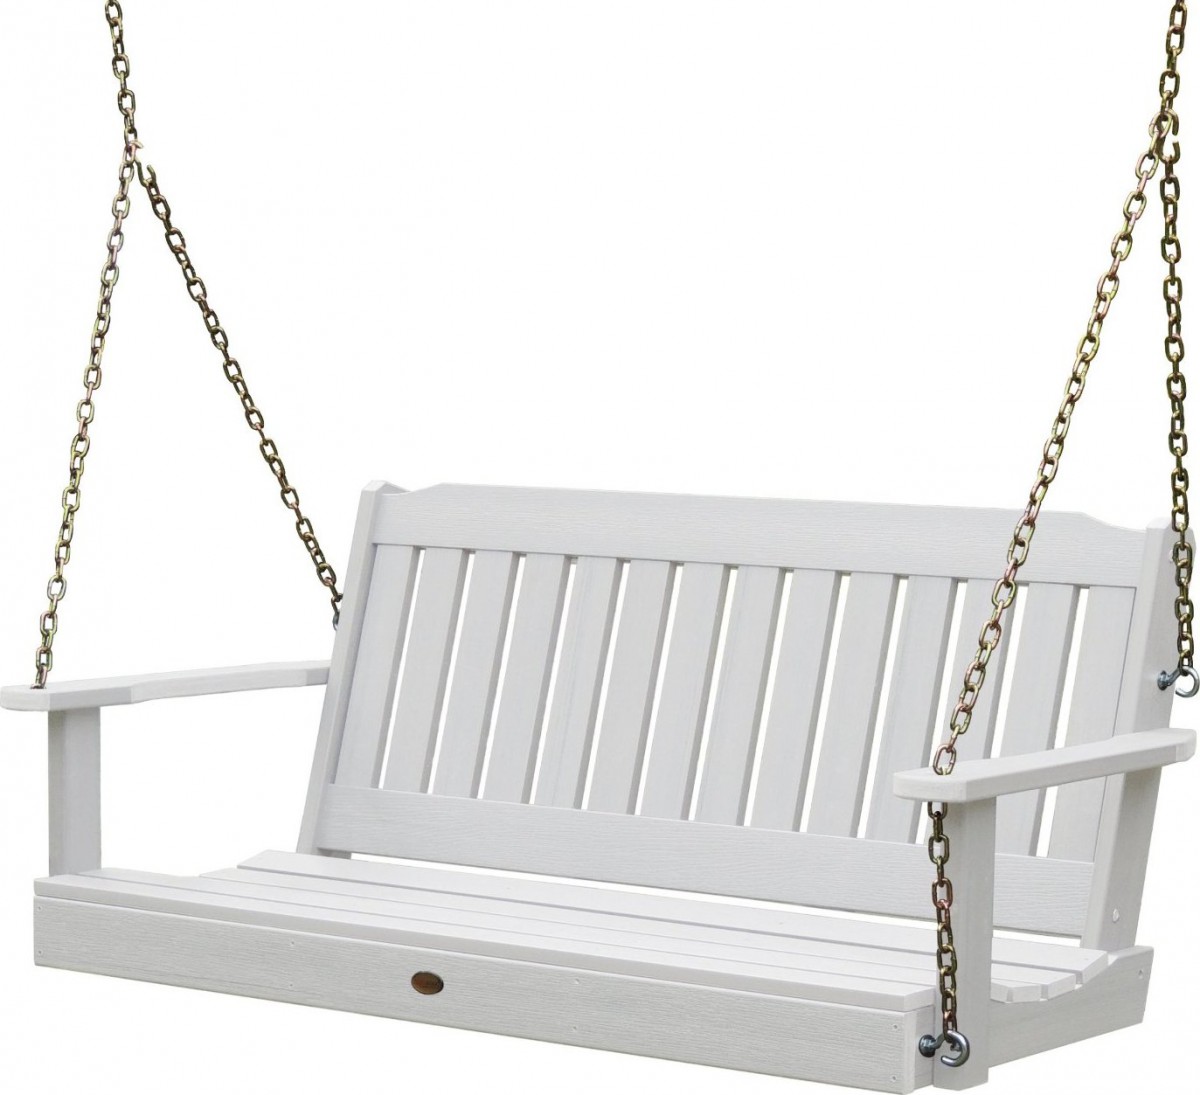 Highwood Outdoor Synthetic / Plastic Wood Porch Swing Set